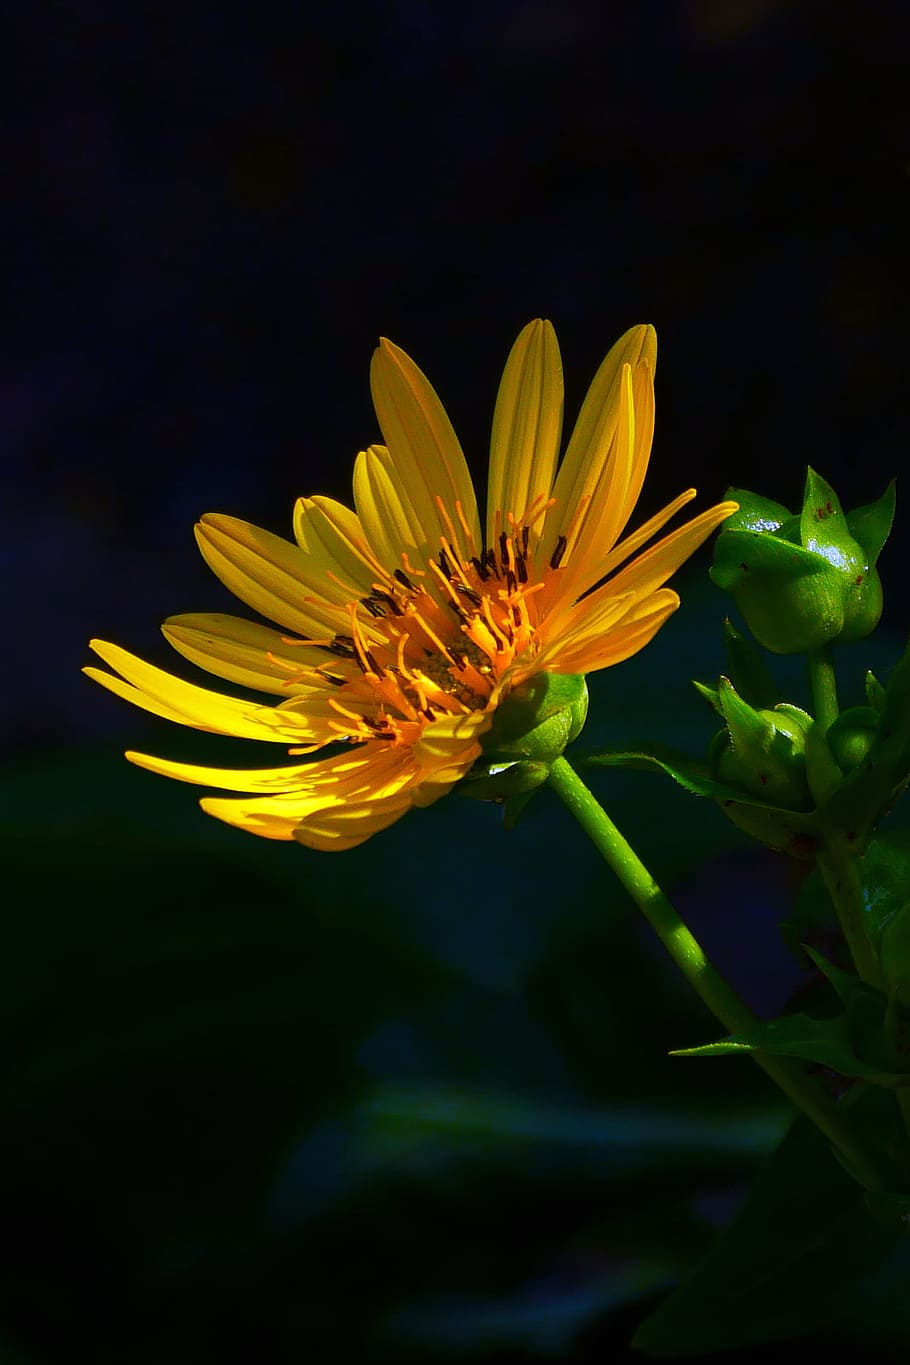 Golden Aster flower bathed in partial sunlight while in shade., HD wallpaper